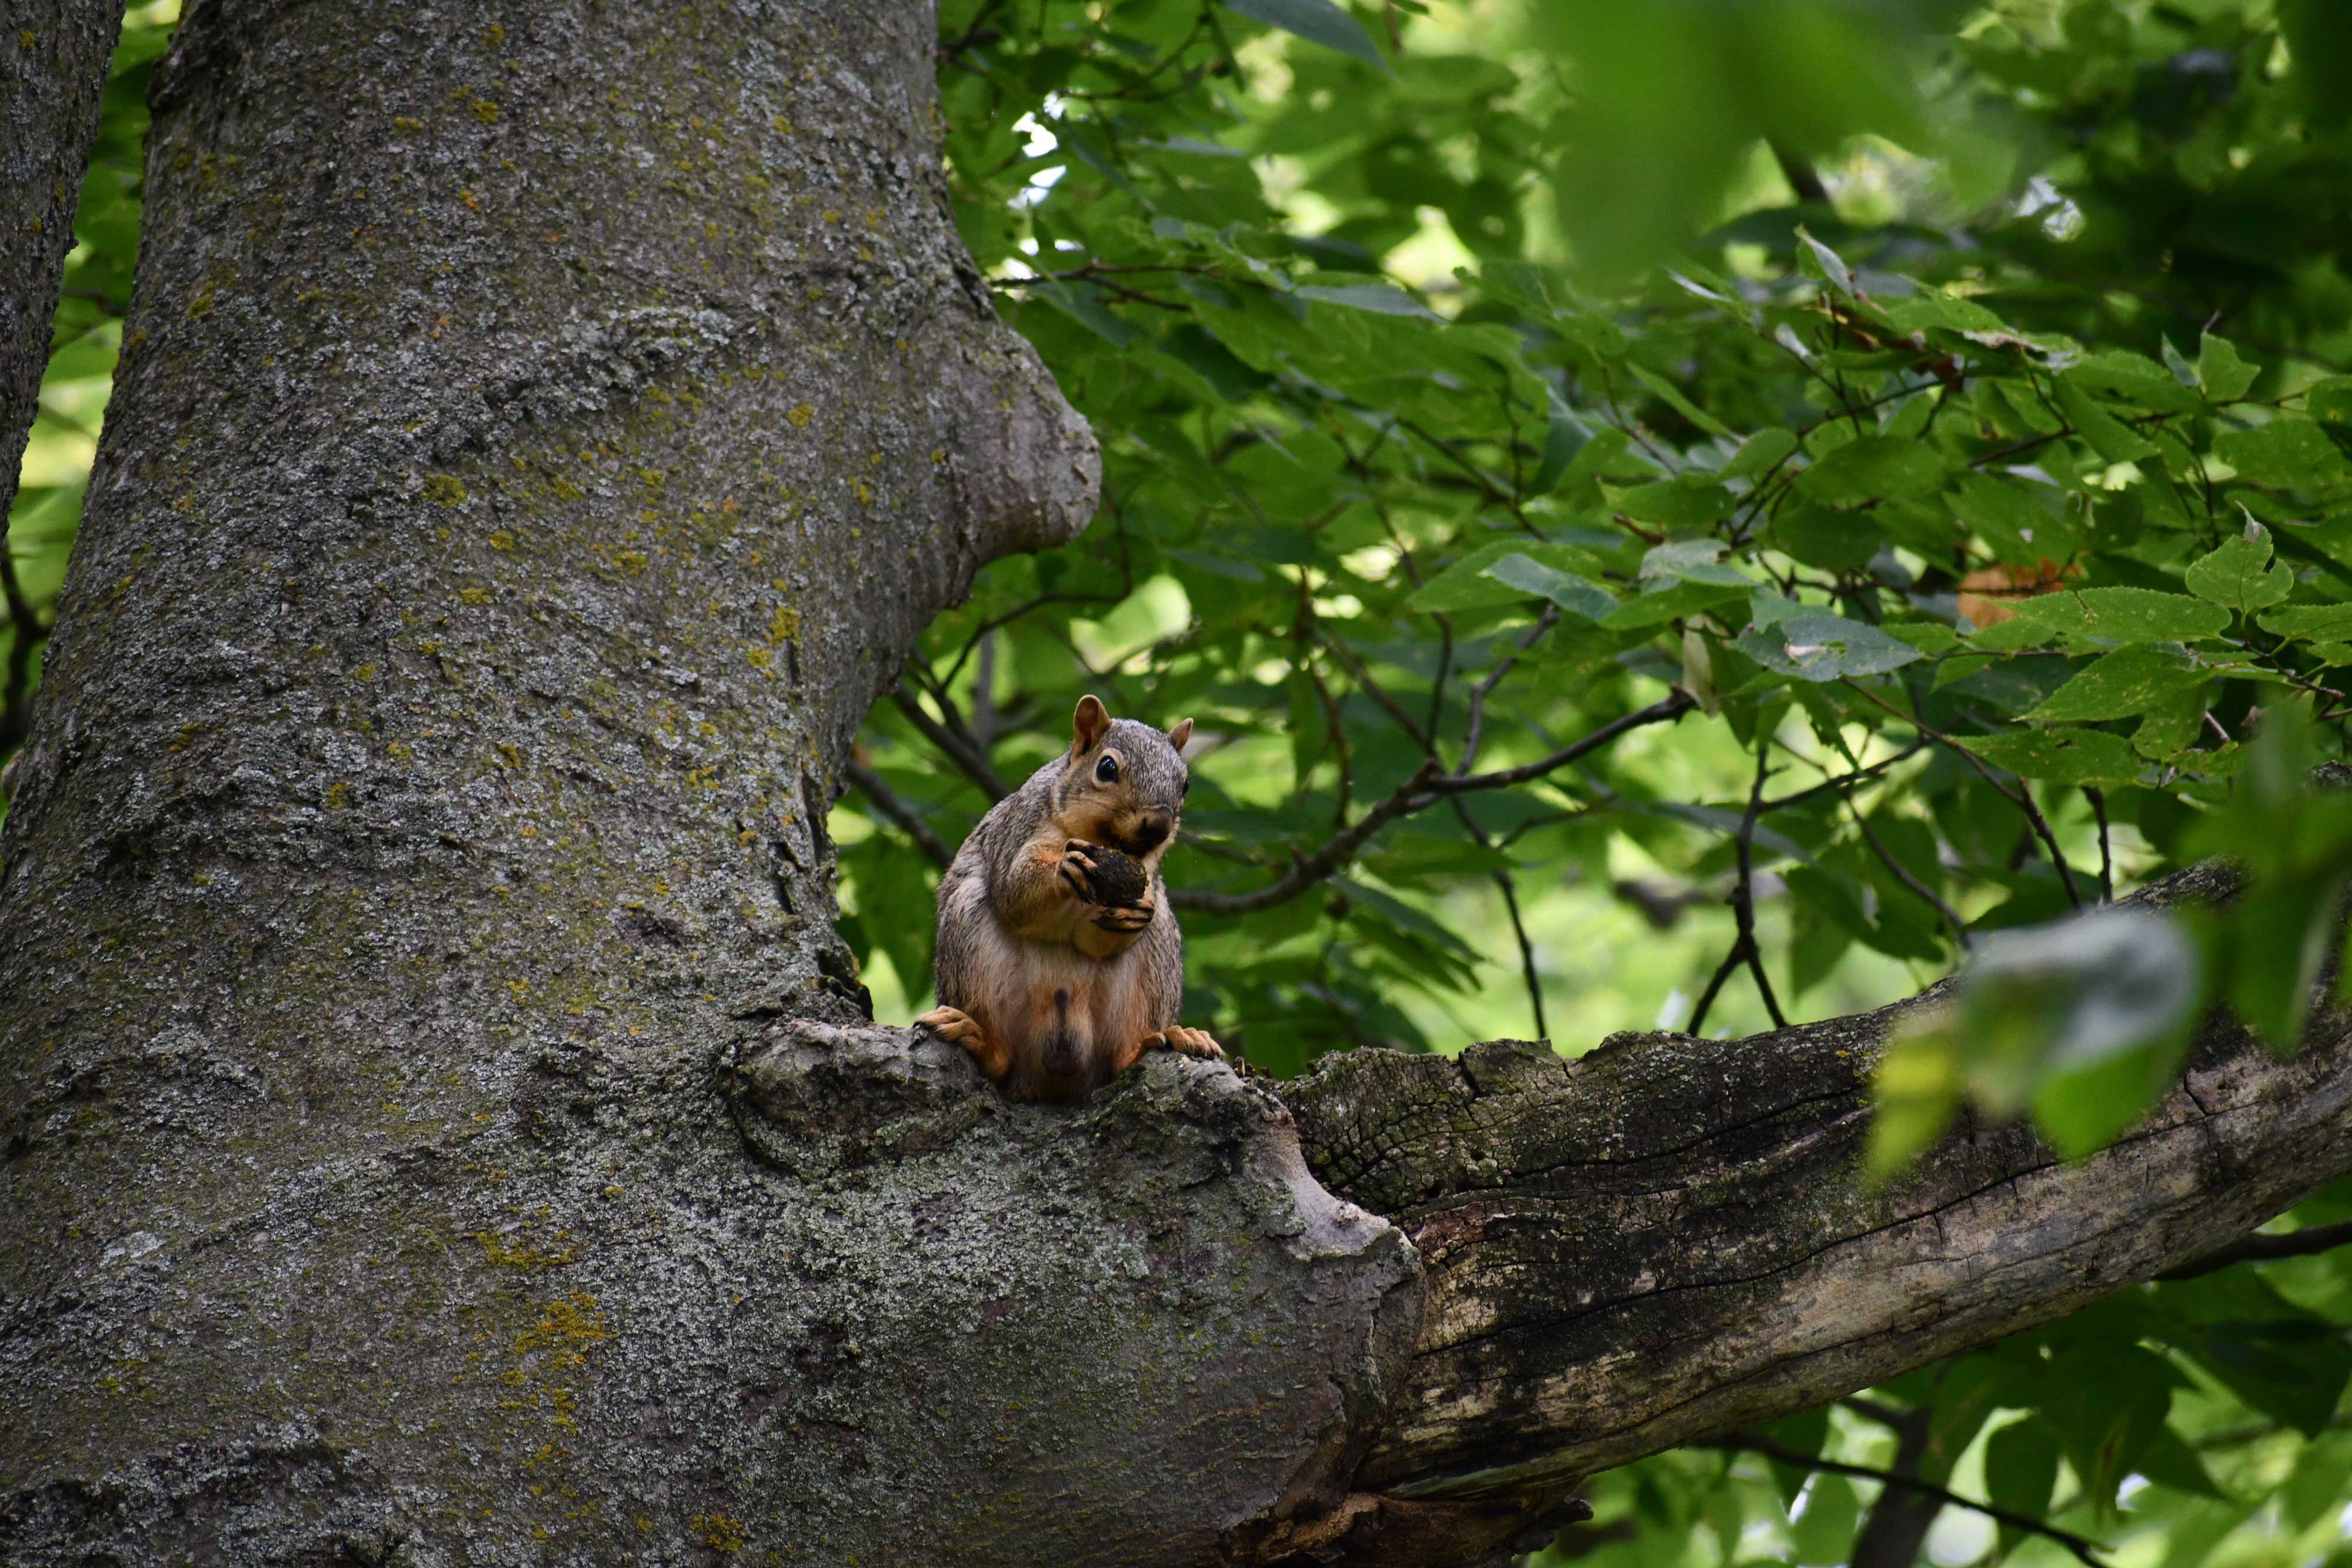 A fox squirrel eating a nut in a tree.